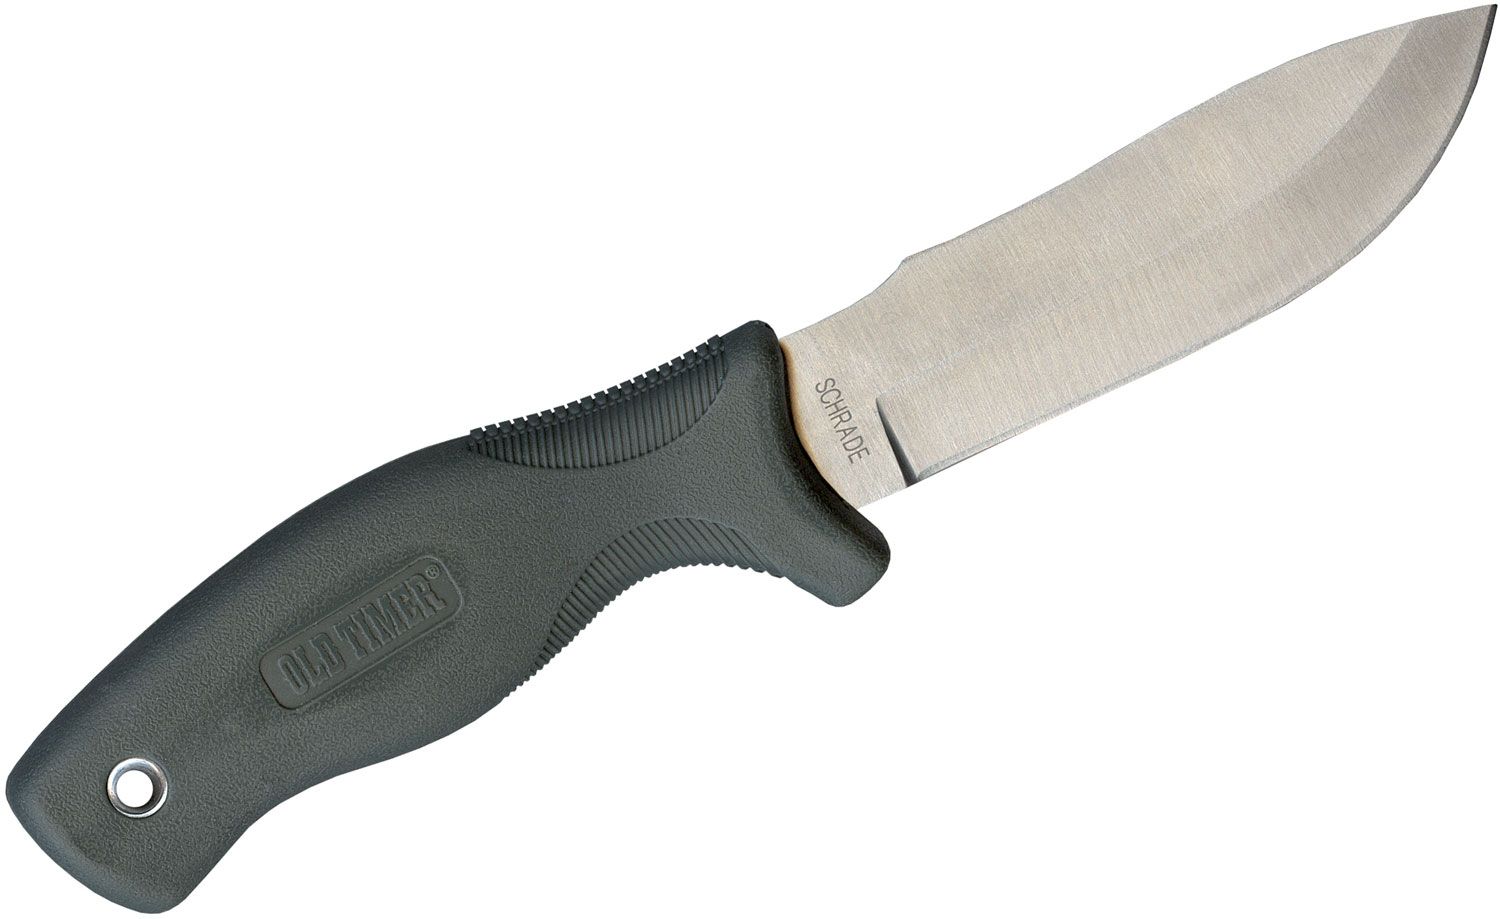 Schrade Old Timer Lithium-Ion Electric Fillet Knife 8 inch Replaceable  Blade, Black and Gray TPE Handles, Carry Case Included